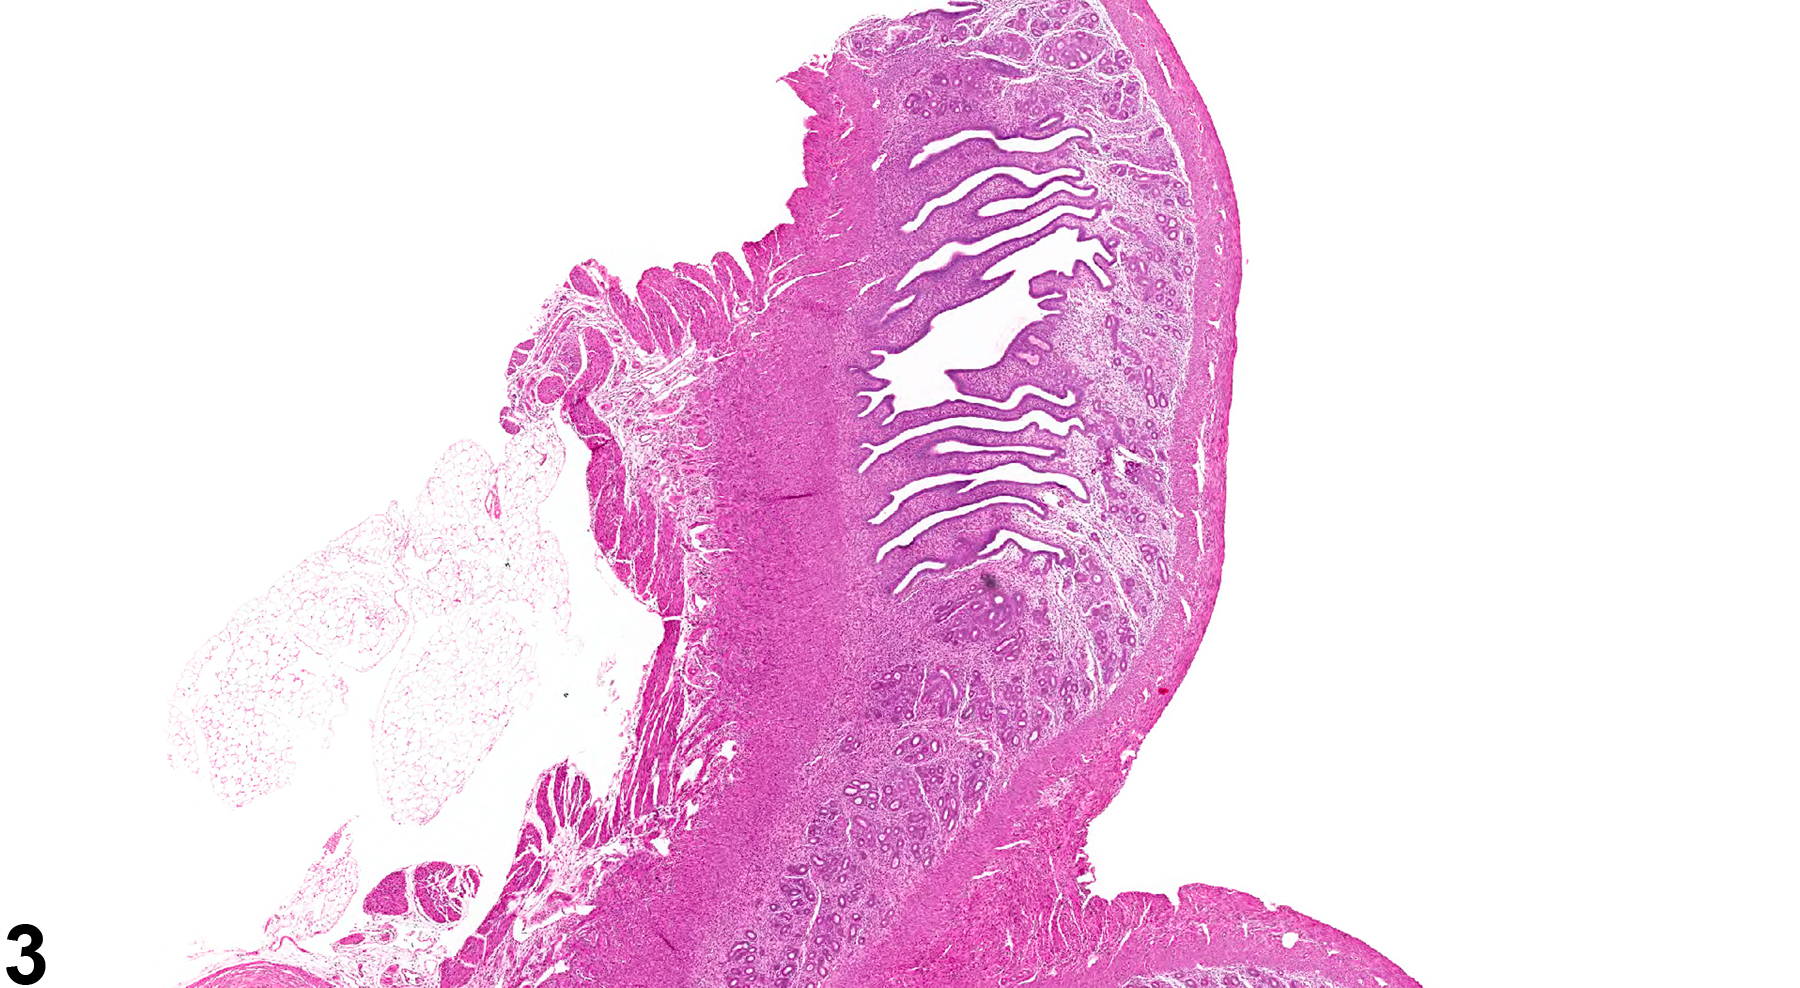 Image of edema in the uterus from a female B6C3F1 mouse in a chronic study